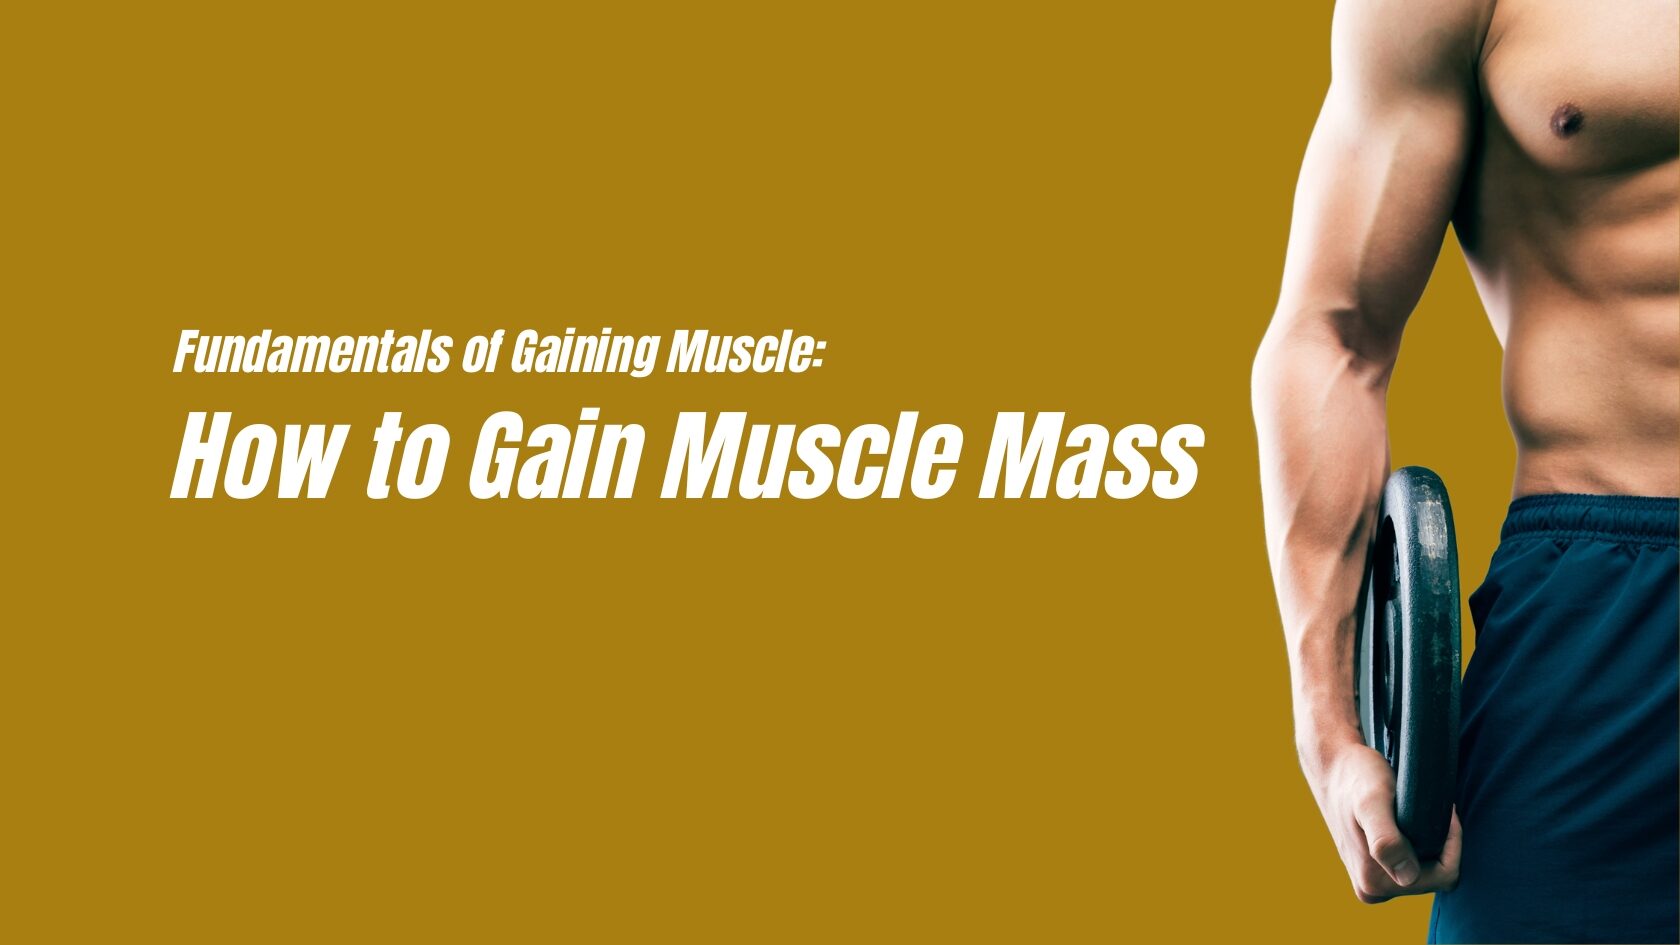 Gain muscle mass Building muscle Muscle growth Protein intake Progressive resistance training Muscle recovery Muscle-building nutrition